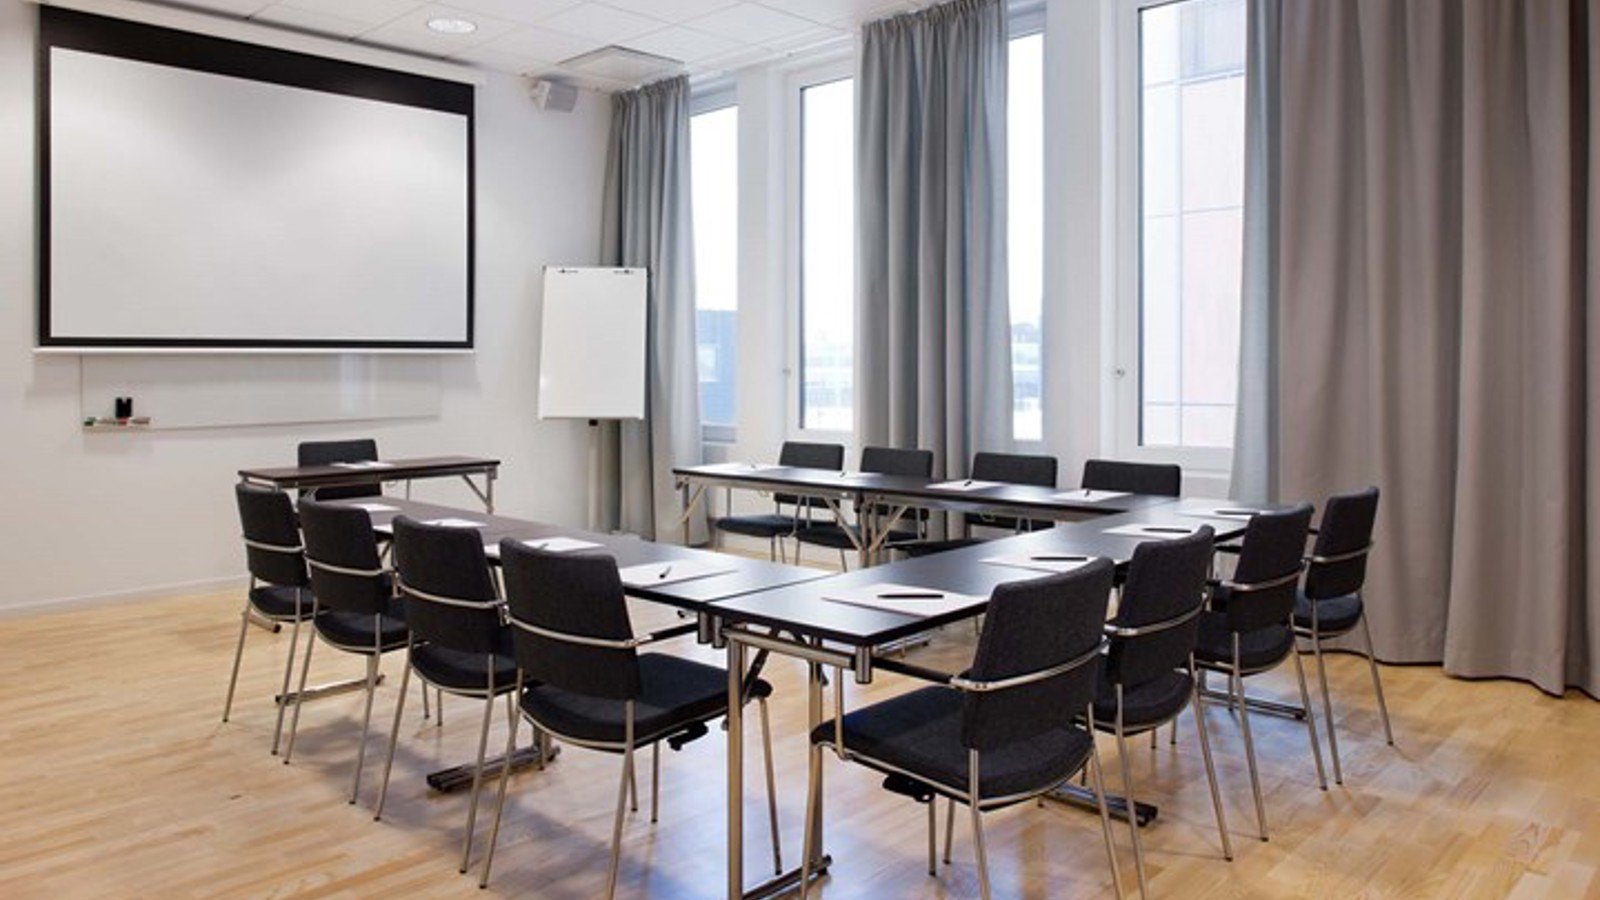 Conference room with u-shaped seating, a projector, large windows and wooden floor